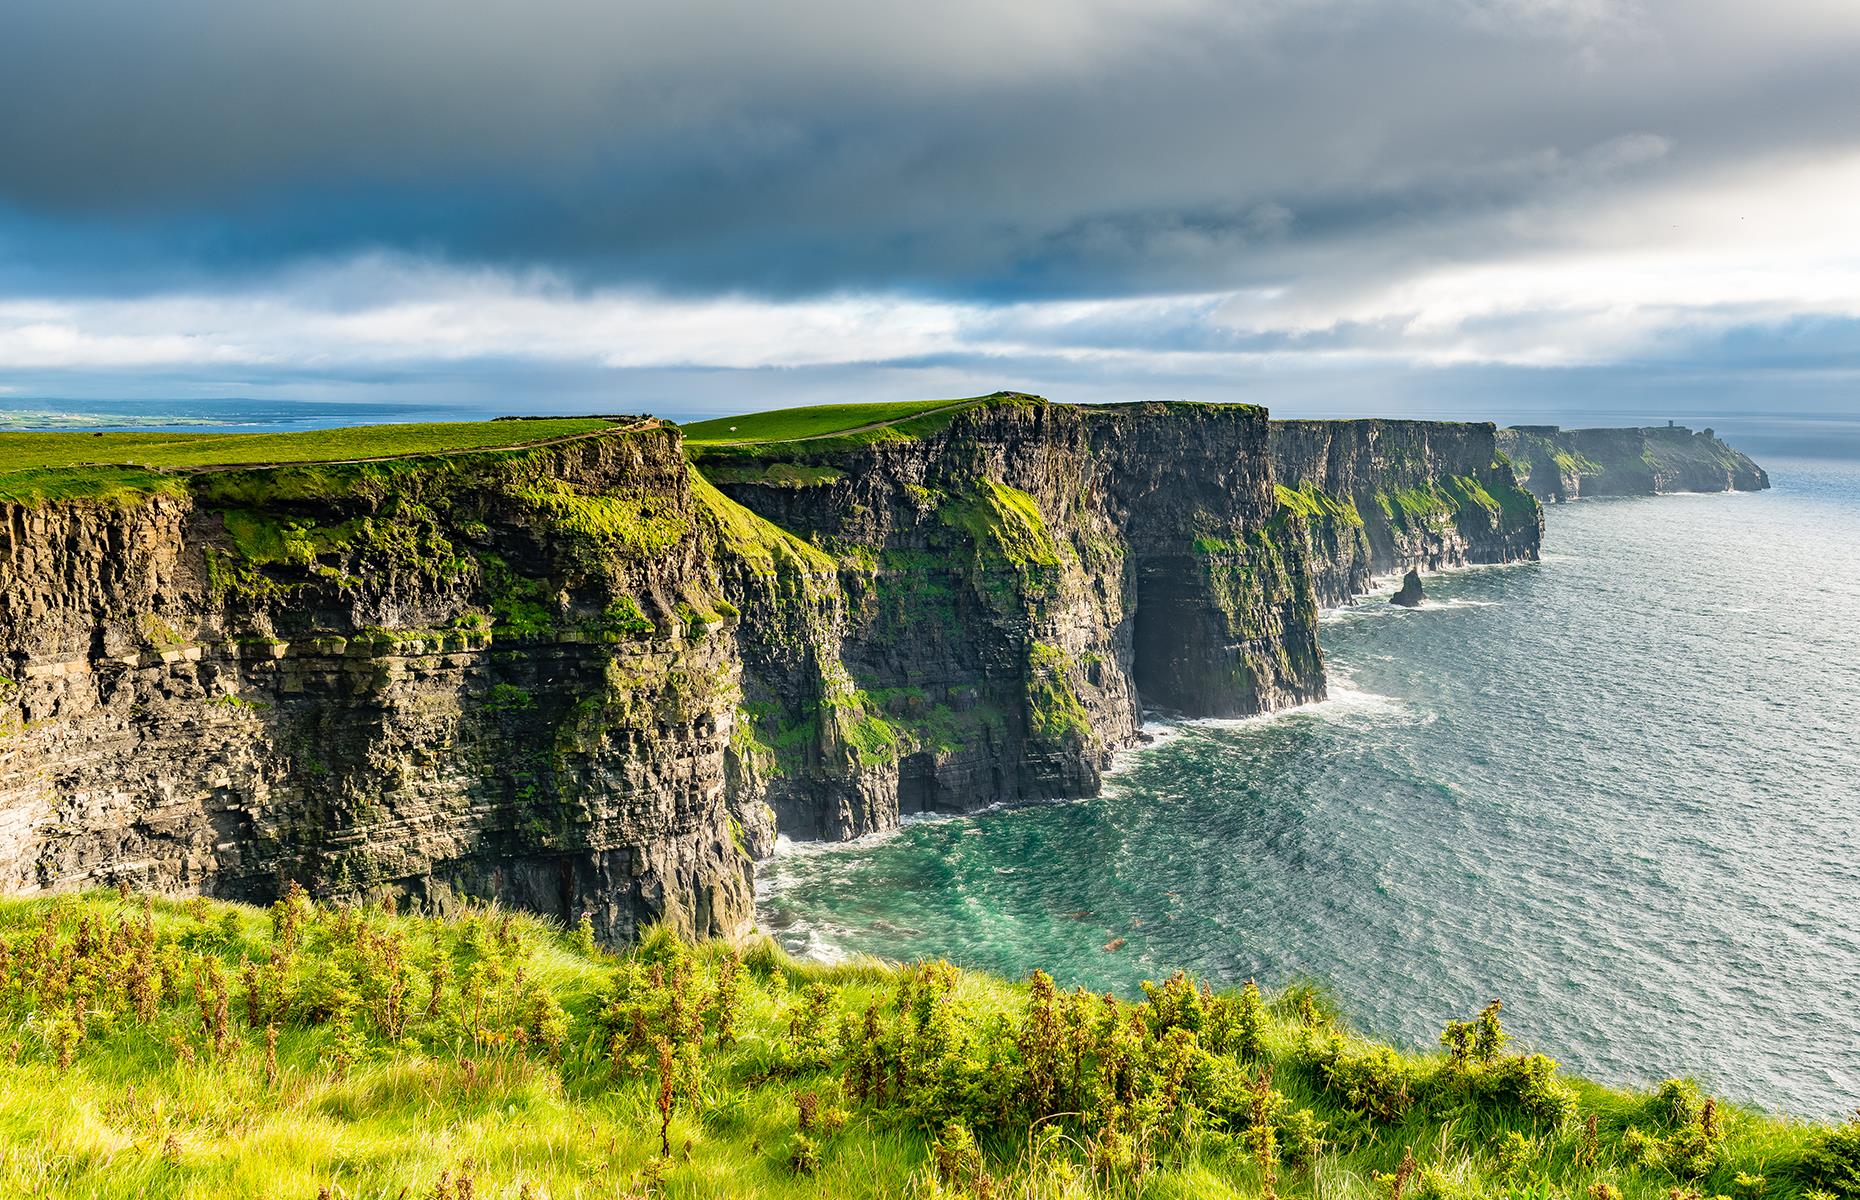 <p>Soaring 700 feet (214m) above the Atlantic Ocean and stretching some nine miles (14km) along Ireland’s rugged West County Clare Coast, there’s more than enough wow factor to mesmerize the whole family at the <a href="https://www.cliffsofmoher.ie/">Cliffs of Moher</a>. There are safe, paved pathways and telescopes with which to admire the views, seabirds and rare wildflowers, plus a multi-award-winning visitor center (built into the hillside like a Hobbit’s cave) with exhibitions and interactive screens for children to learn about the animals and birds. Kids under 12 also go free. </p>